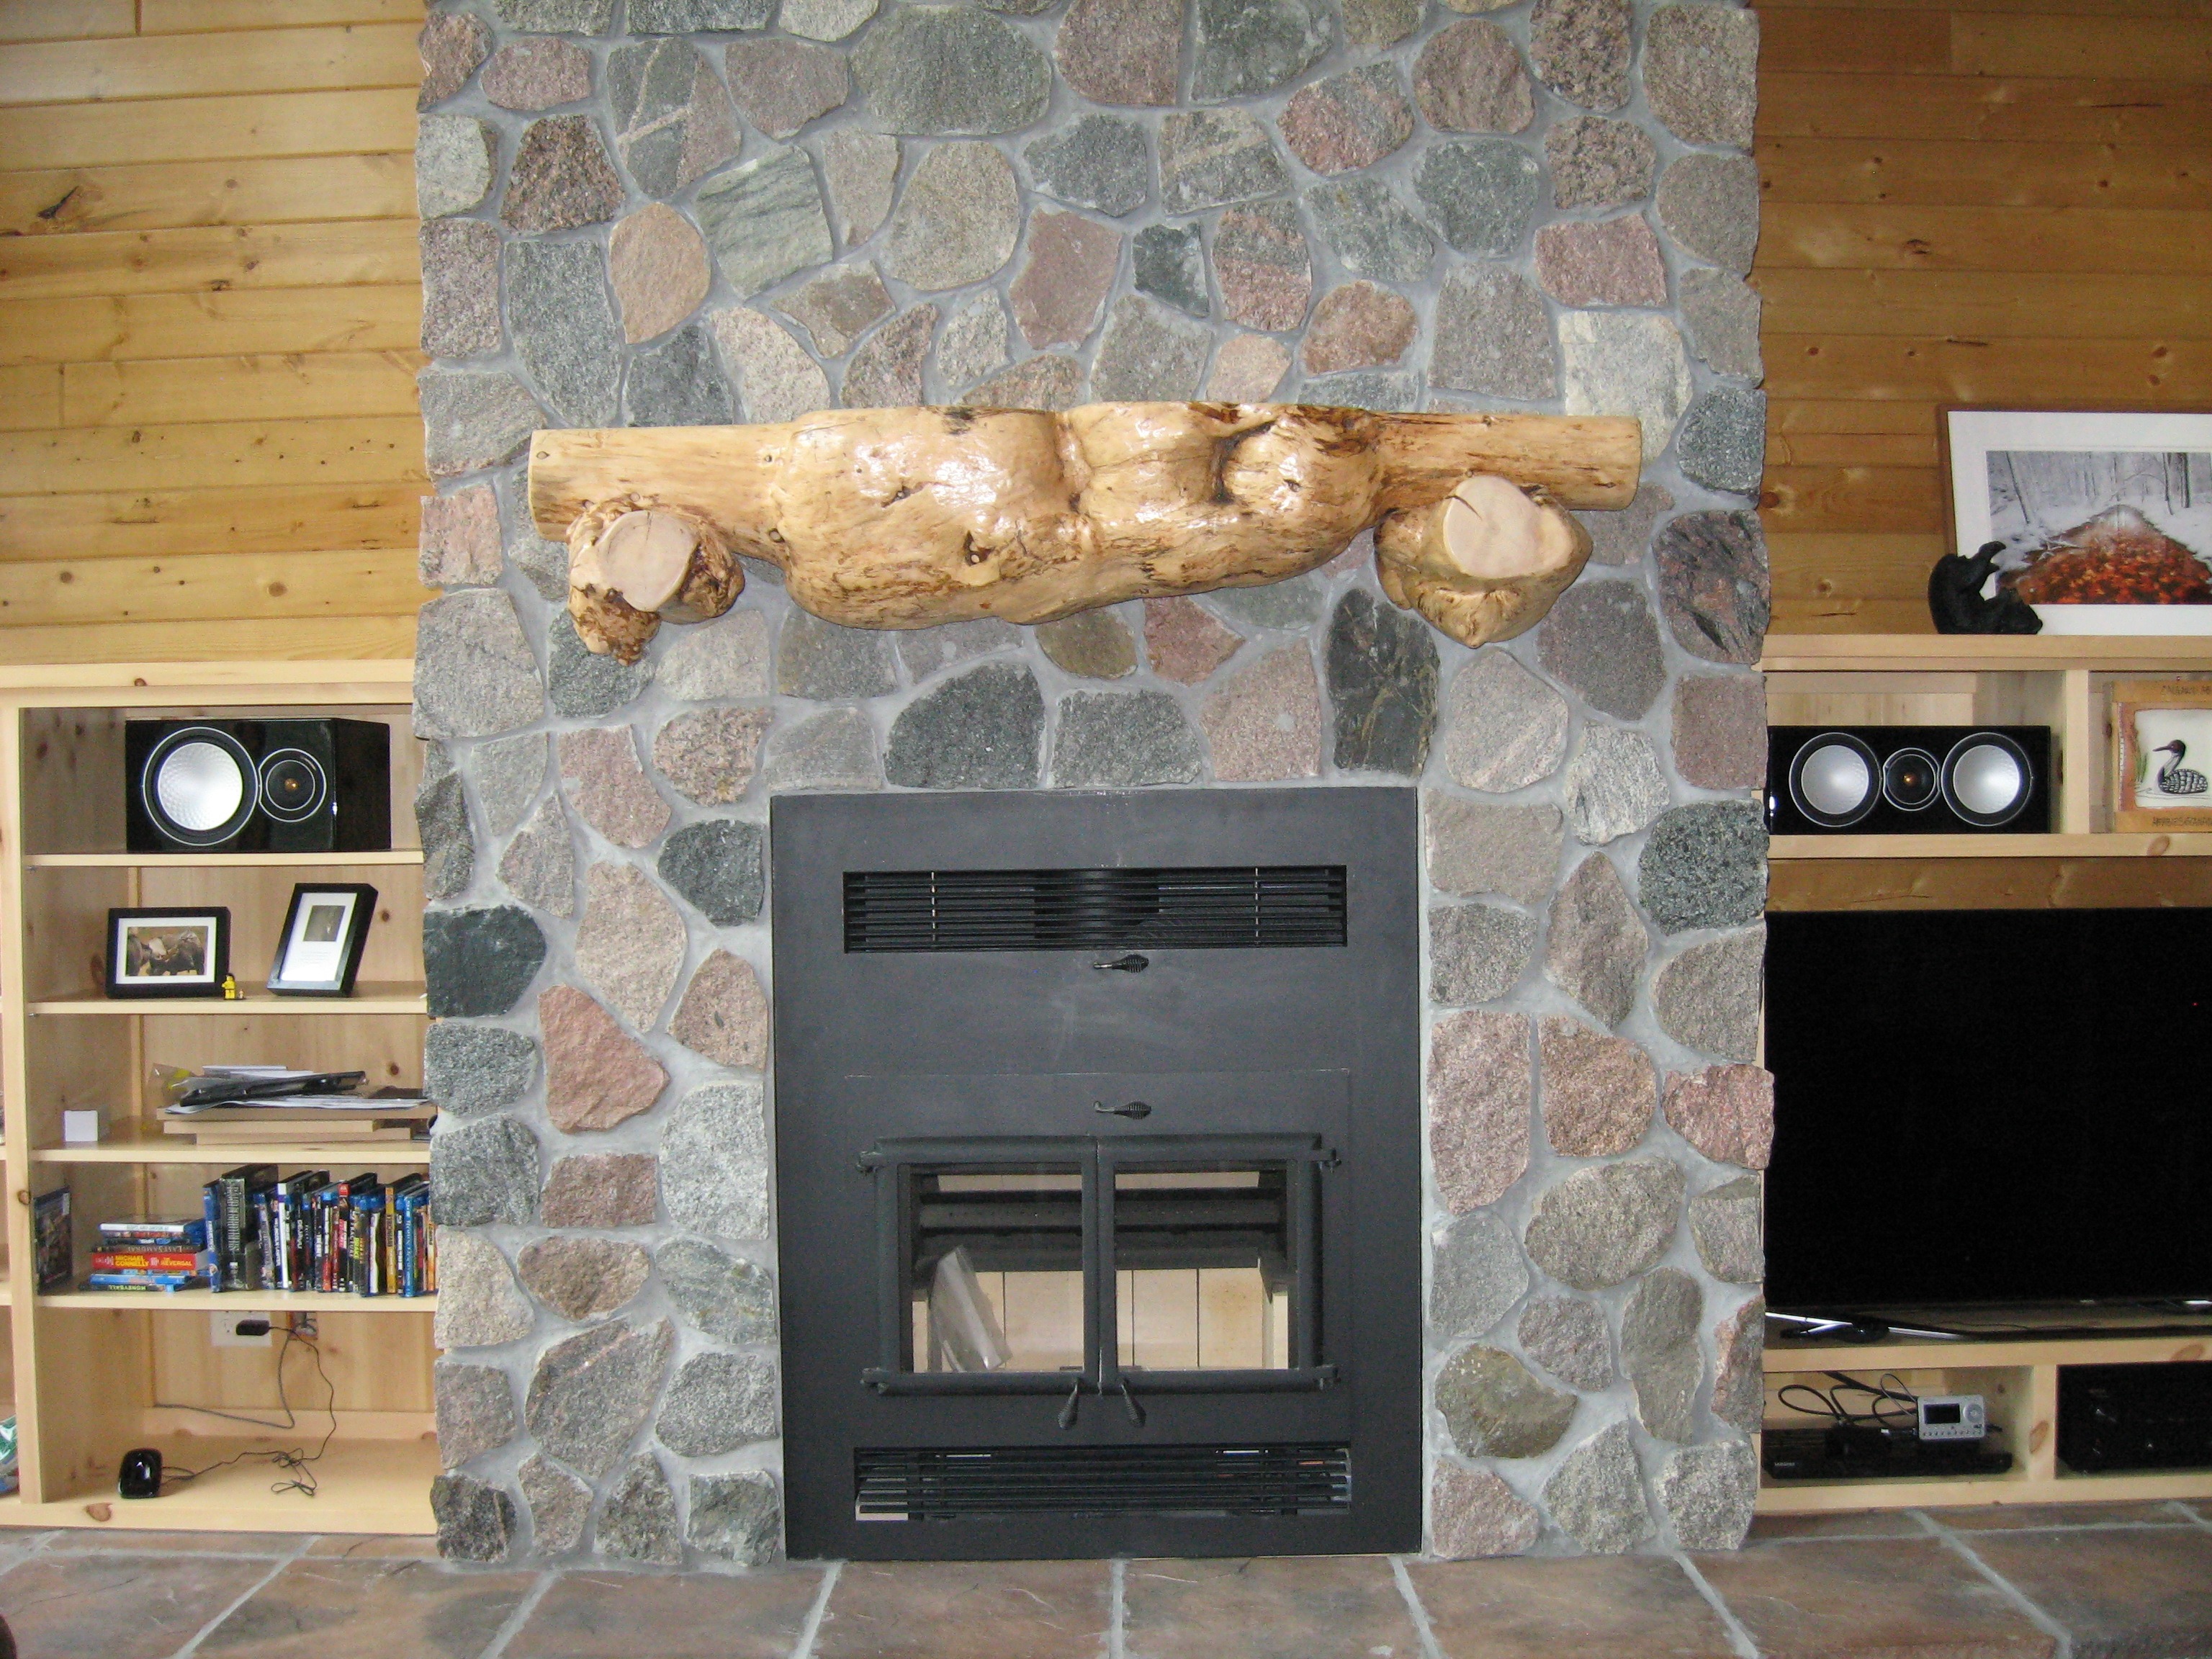 Natural tree shelf over the fireplace